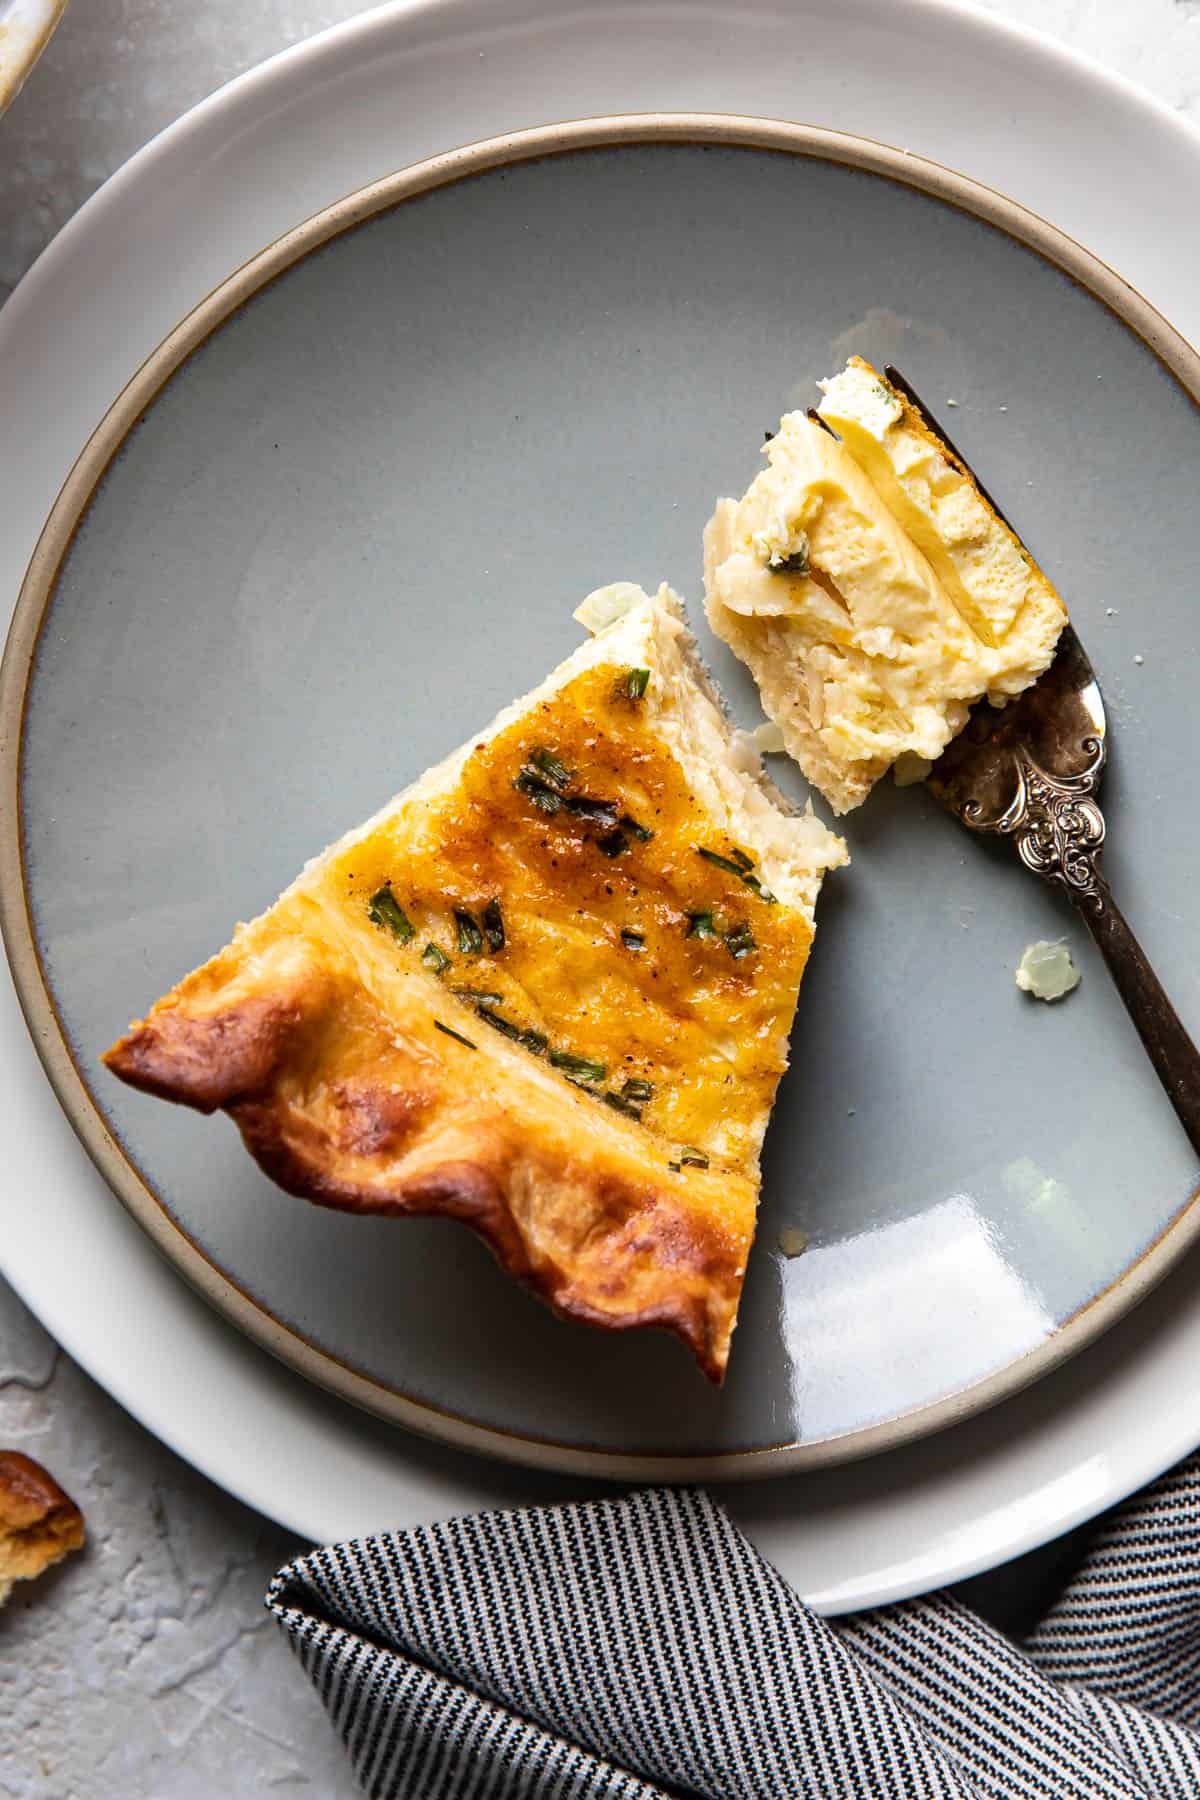 slice of quiche on a plate.